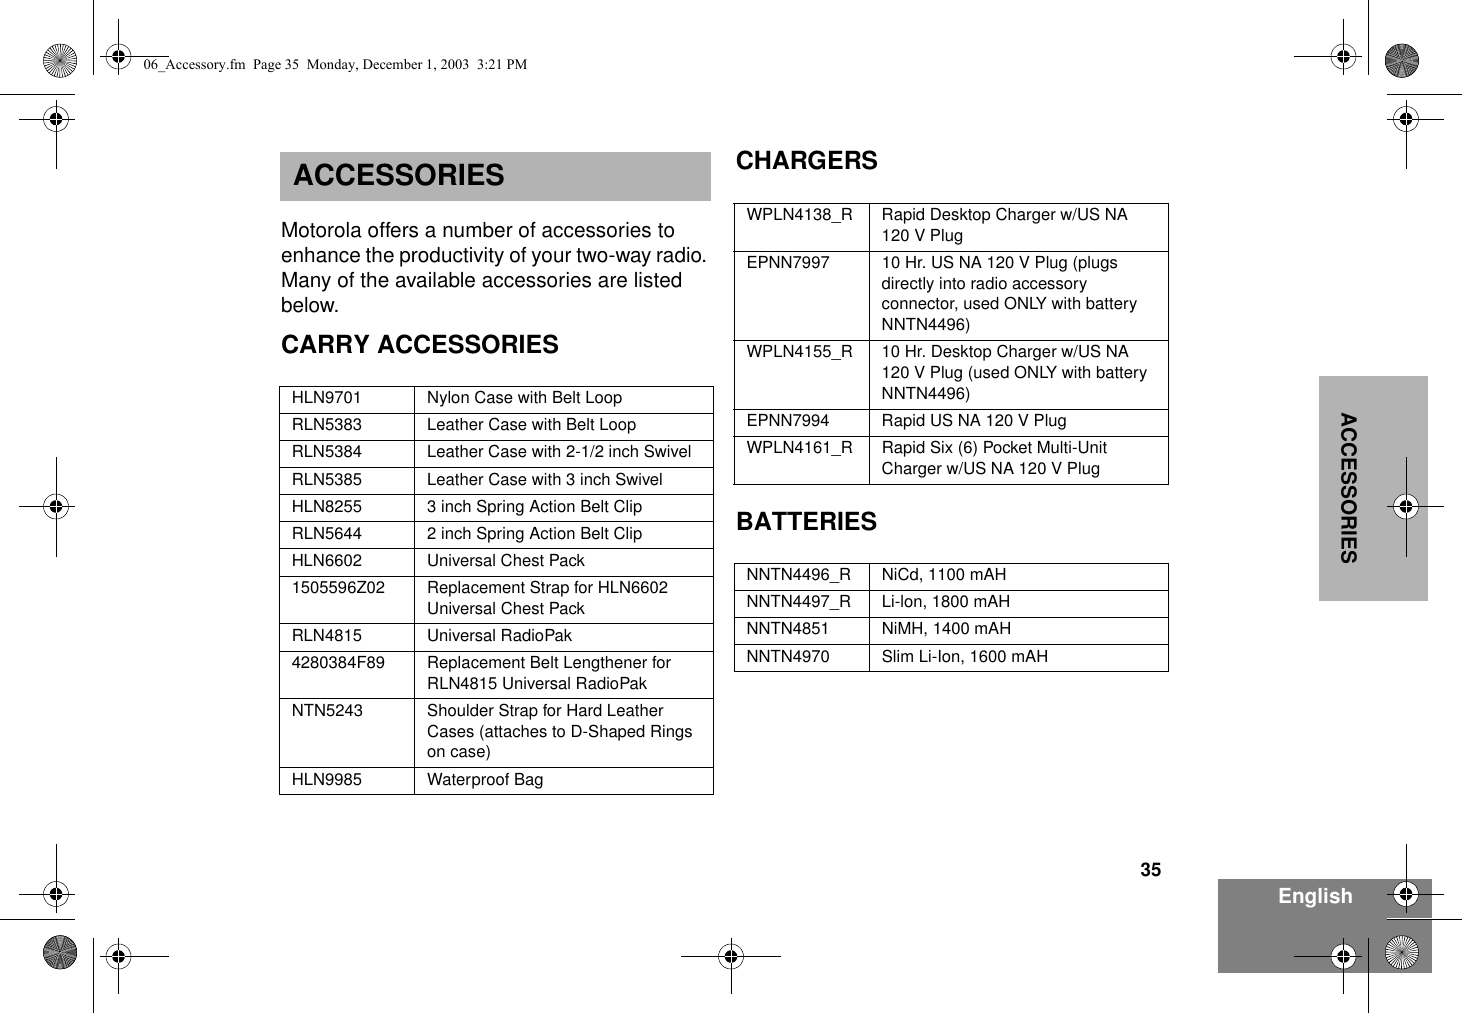 35EnglishACCESSORIESACCESSORIESMotorola offers a number of accessories to enhance the productivity of your two-way radio. Many of the available accessories are listed below.CARRY ACCESSORIESCHARGERSBATTERIESHLN9701 Nylon Case with Belt LoopRLN5383 Leather Case with Belt LoopRLN5384 Leather Case with 2-1/2 inch SwivelRLN5385 Leather Case with 3 inch SwivelHLN8255 3 inch Spring Action Belt ClipRLN5644 2 inch Spring Action Belt ClipHLN6602 Universal Chest Pack1505596Z02 Replacement Strap for HLN6602 Universal Chest PackRLN4815 Universal RadioPak4280384F89 Replacement Belt Lengthener for RLN4815 Universal RadioPakNTN5243 Shoulder Strap for Hard Leather Cases (attaches to D-Shaped Rings on case)HLN9985 Waterproof BagWPLN4138_R Rapid Desktop Charger w/US NA 120 V PlugEPNN7997 10 Hr. US NA 120 V Plug (plugs directly into radio accessory connector, used ONLY with battery NNTN4496)WPLN4155_R 10 Hr. Desktop Charger w/US NA 120 V Plug (used ONLY with battery NNTN4496)EPNN7994 Rapid US NA 120 V PlugWPLN4161_R Rapid Six (6) Pocket Multi-Unit Charger w/US NA 120 V PlugNNTN4496_R NiCd, 1100 mAHNNTN4497_R Li-lon, 1800 mAHNNTN4851 NiMH, 1400 mAHNNTN4970 Slim Li-Ion, 1600 mAH06_Accessory.fm  Page 35  Monday, December 1, 2003  3:21 PM